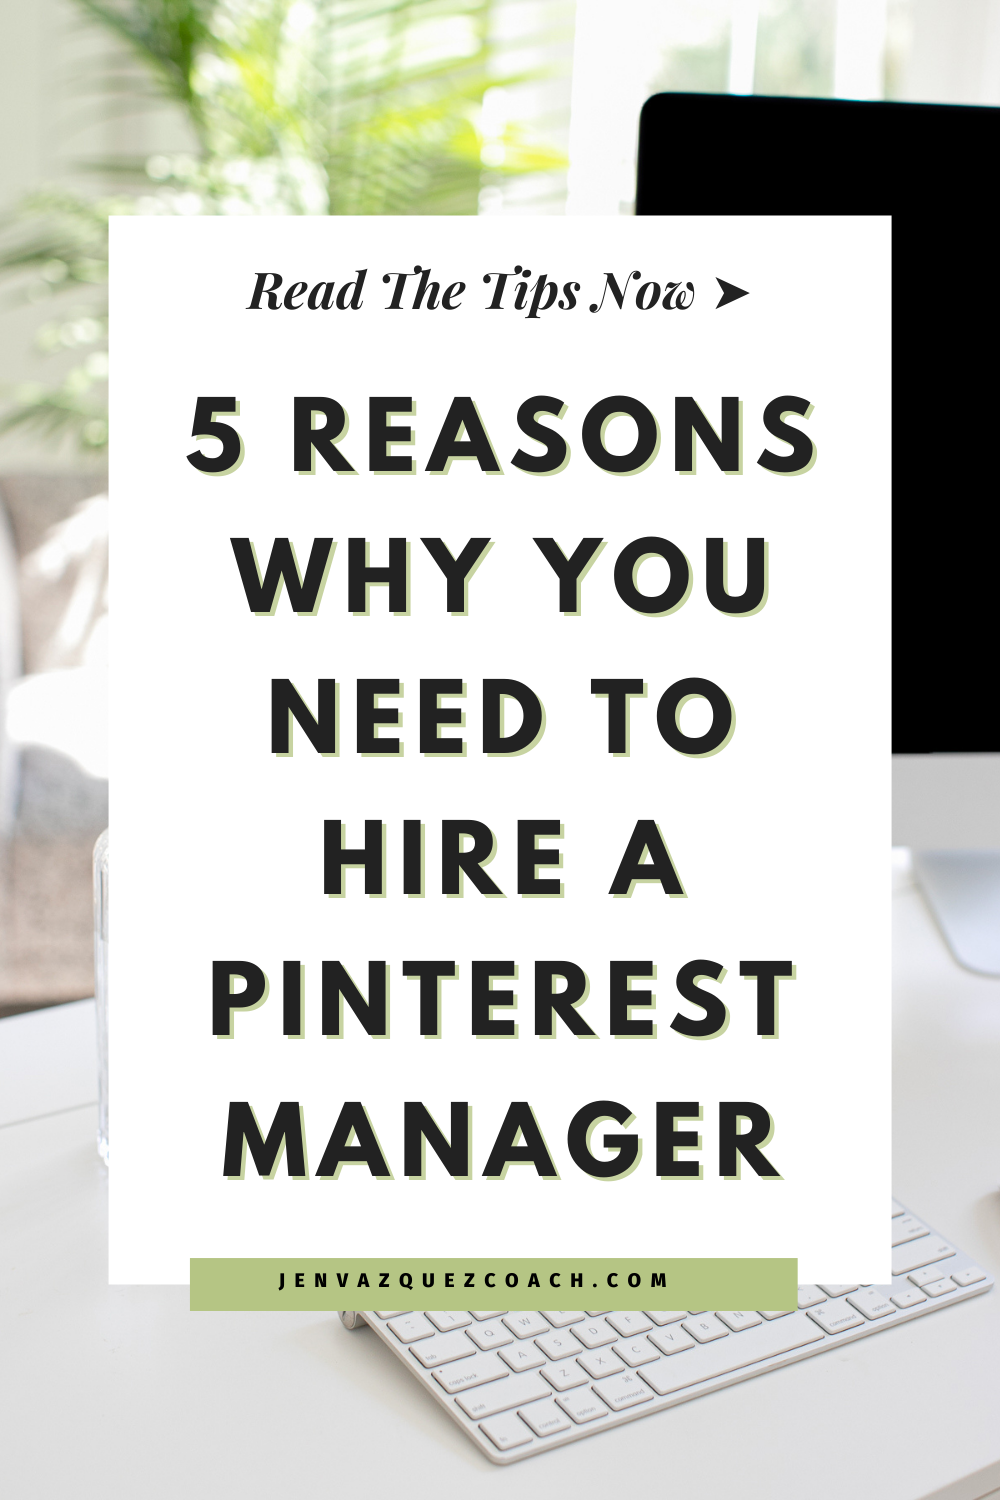 5 Reasons Why You Need To Hire A Pinterest Manager by Jen Vazquez Media Pinterest Marketing Management